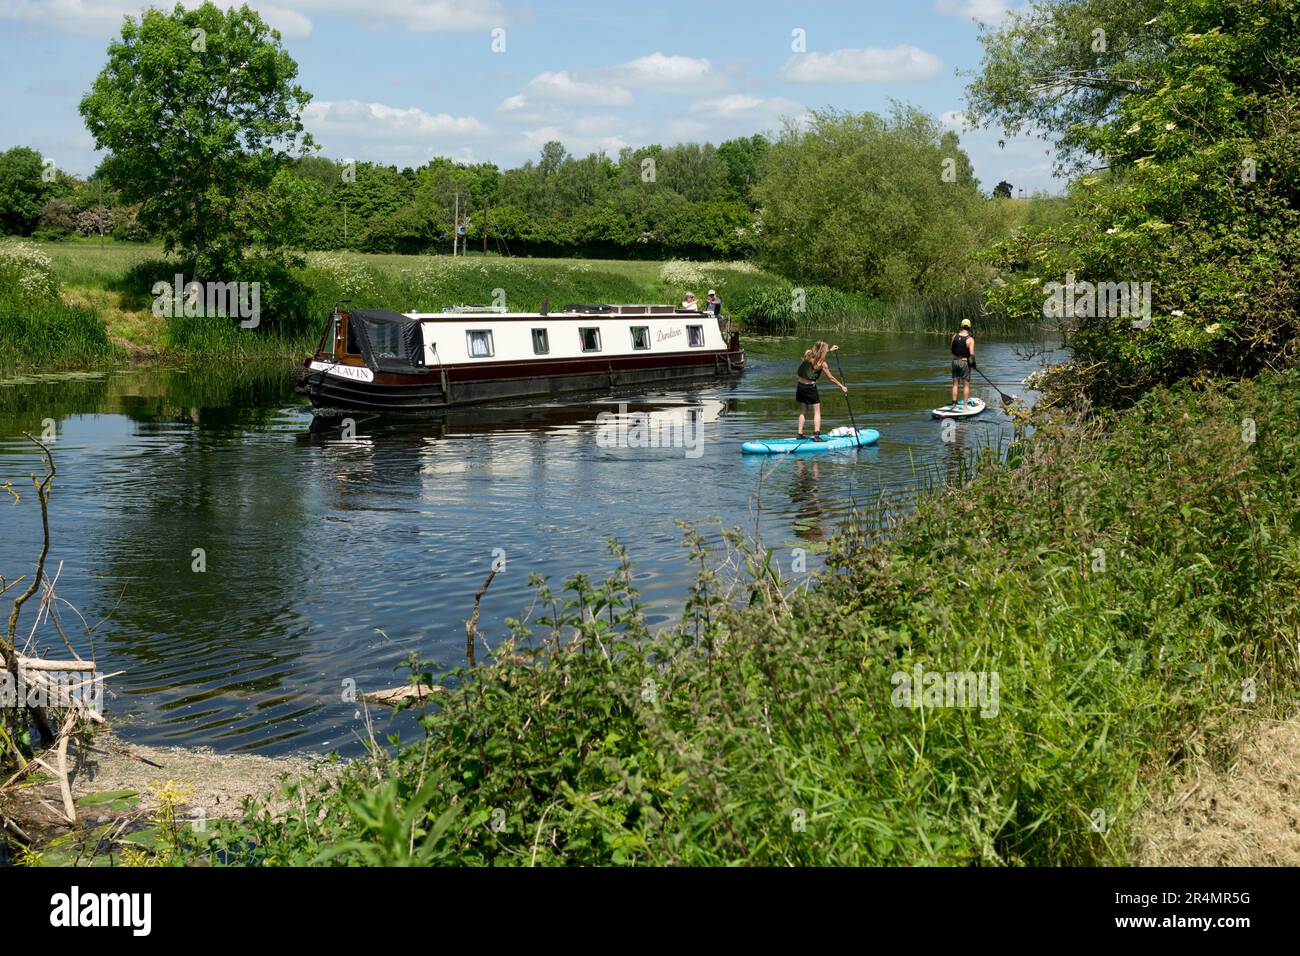 Paddleboarders and a narrowboat on the River Avon, Stratford-upon-Avon, Warwickshire, UK Stock Photo